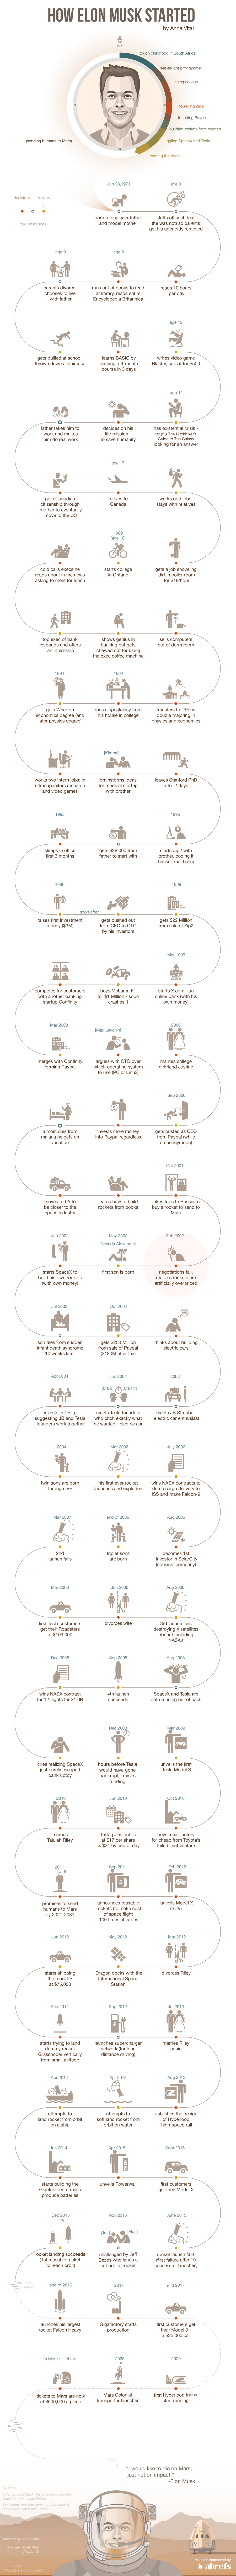 how-elon-musk-started-infographic